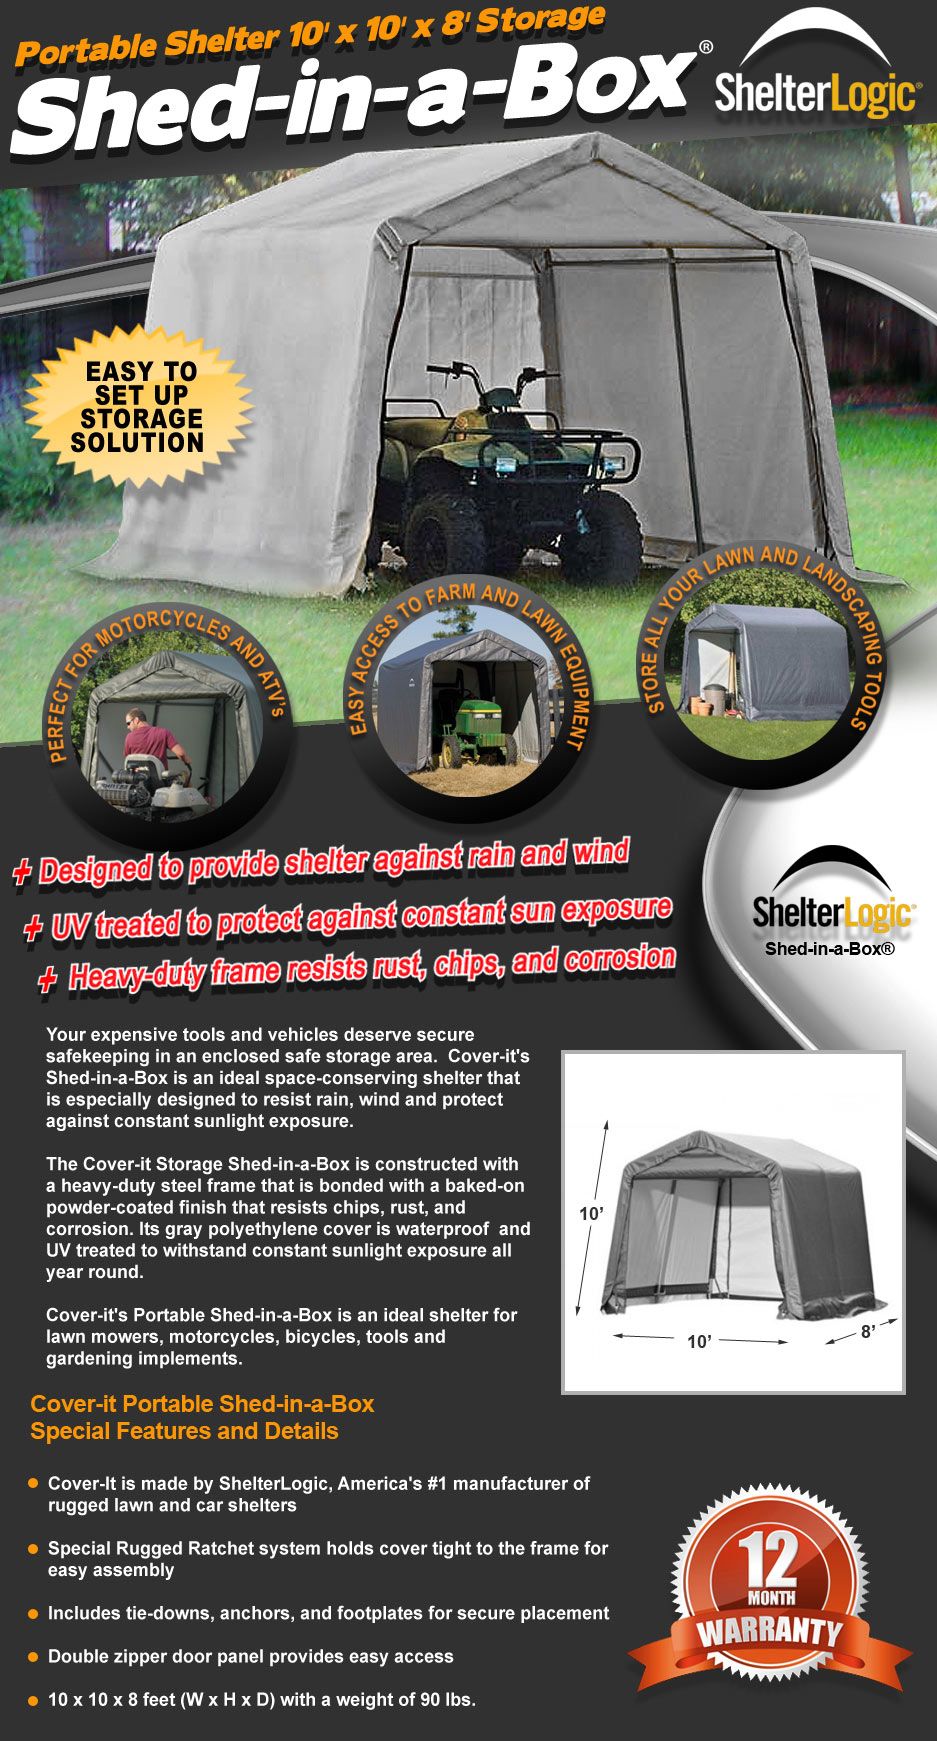  summer gazebos tents winter tarps and covers wholesale lots other